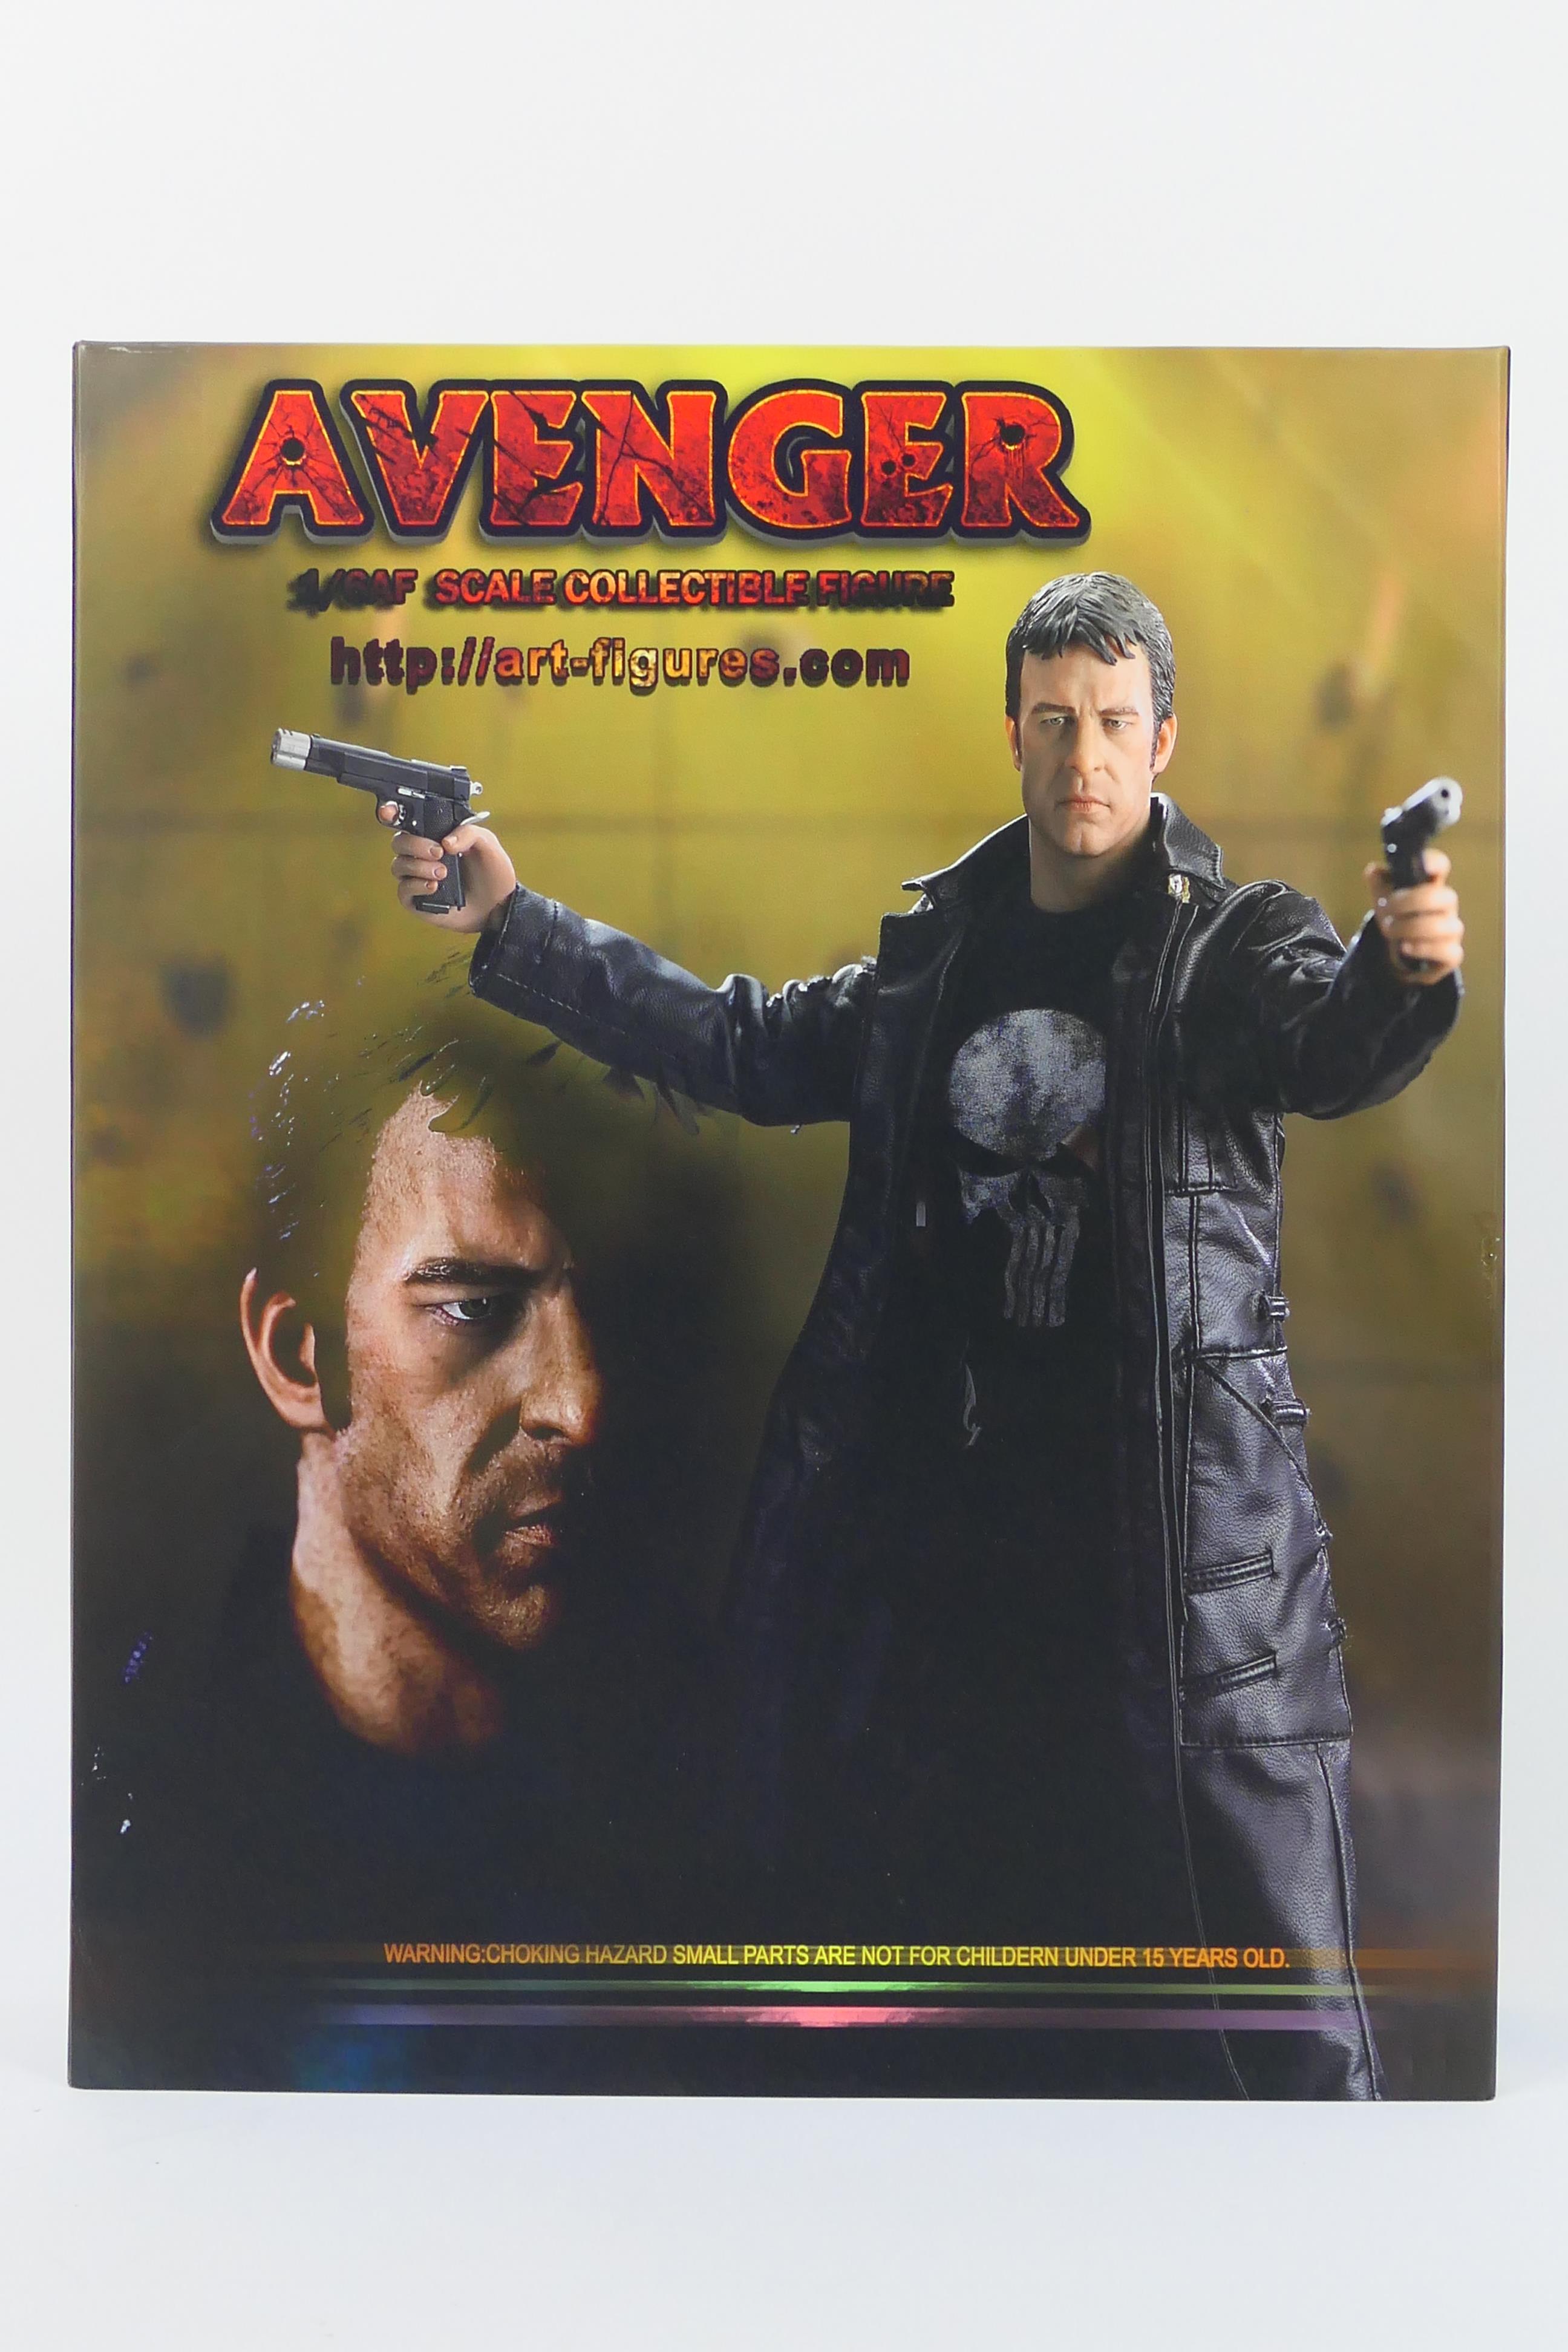 Art-figures - Avenger - A boxed 12 inch Frank Castle 1/6 scale figure with accessories # AF-005. - Image 5 of 5